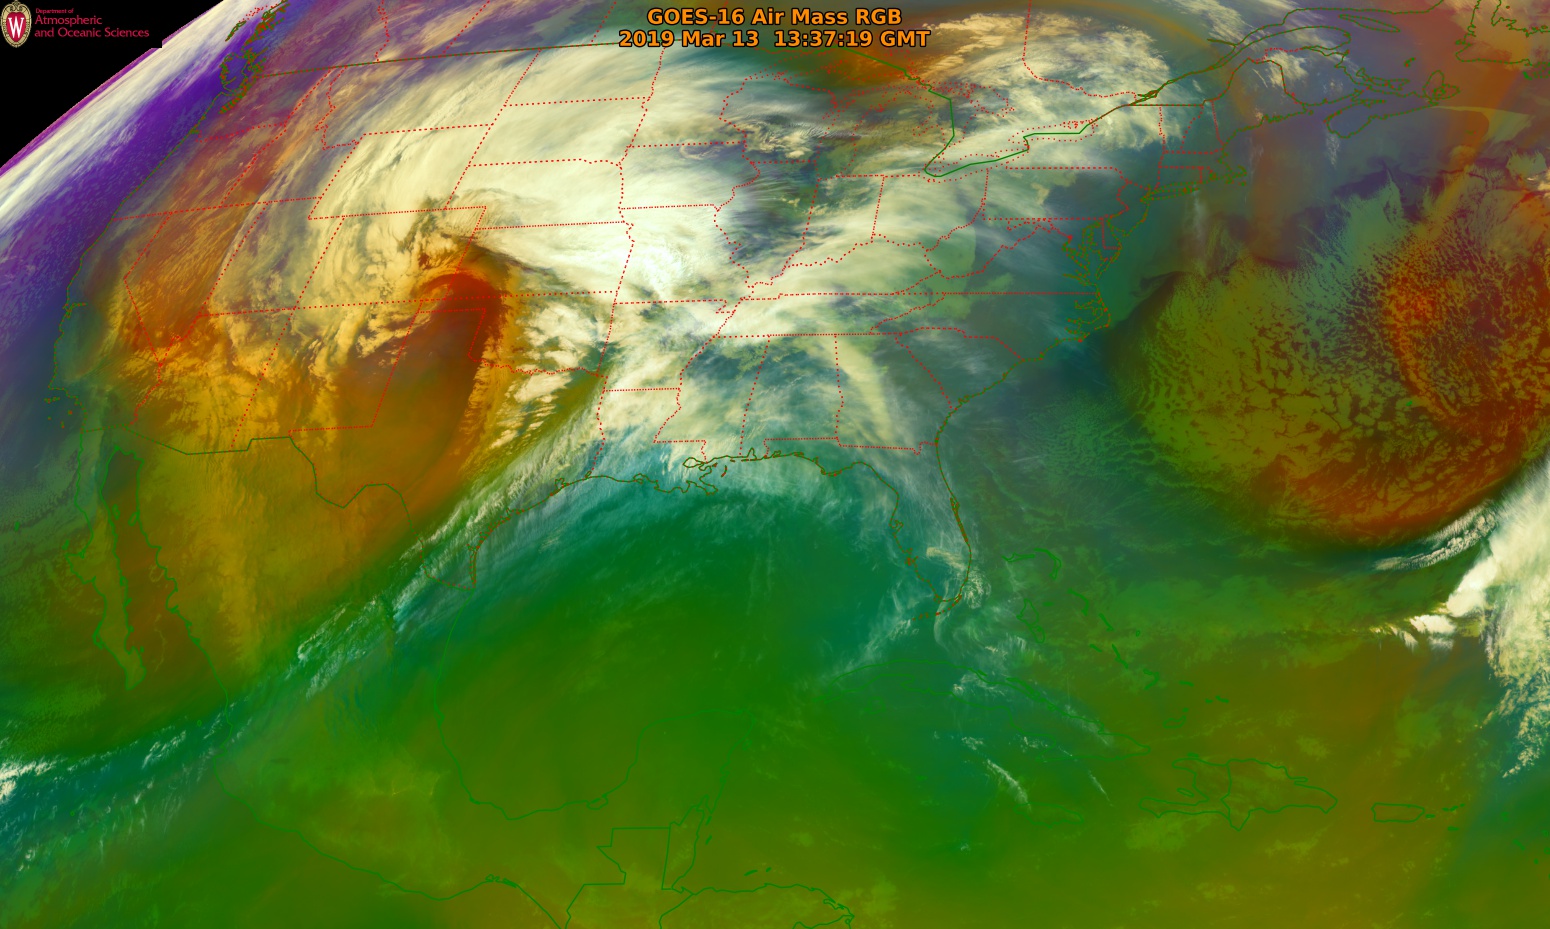 GOES-16 Air Mass RGB images [click to play animation | MP4]